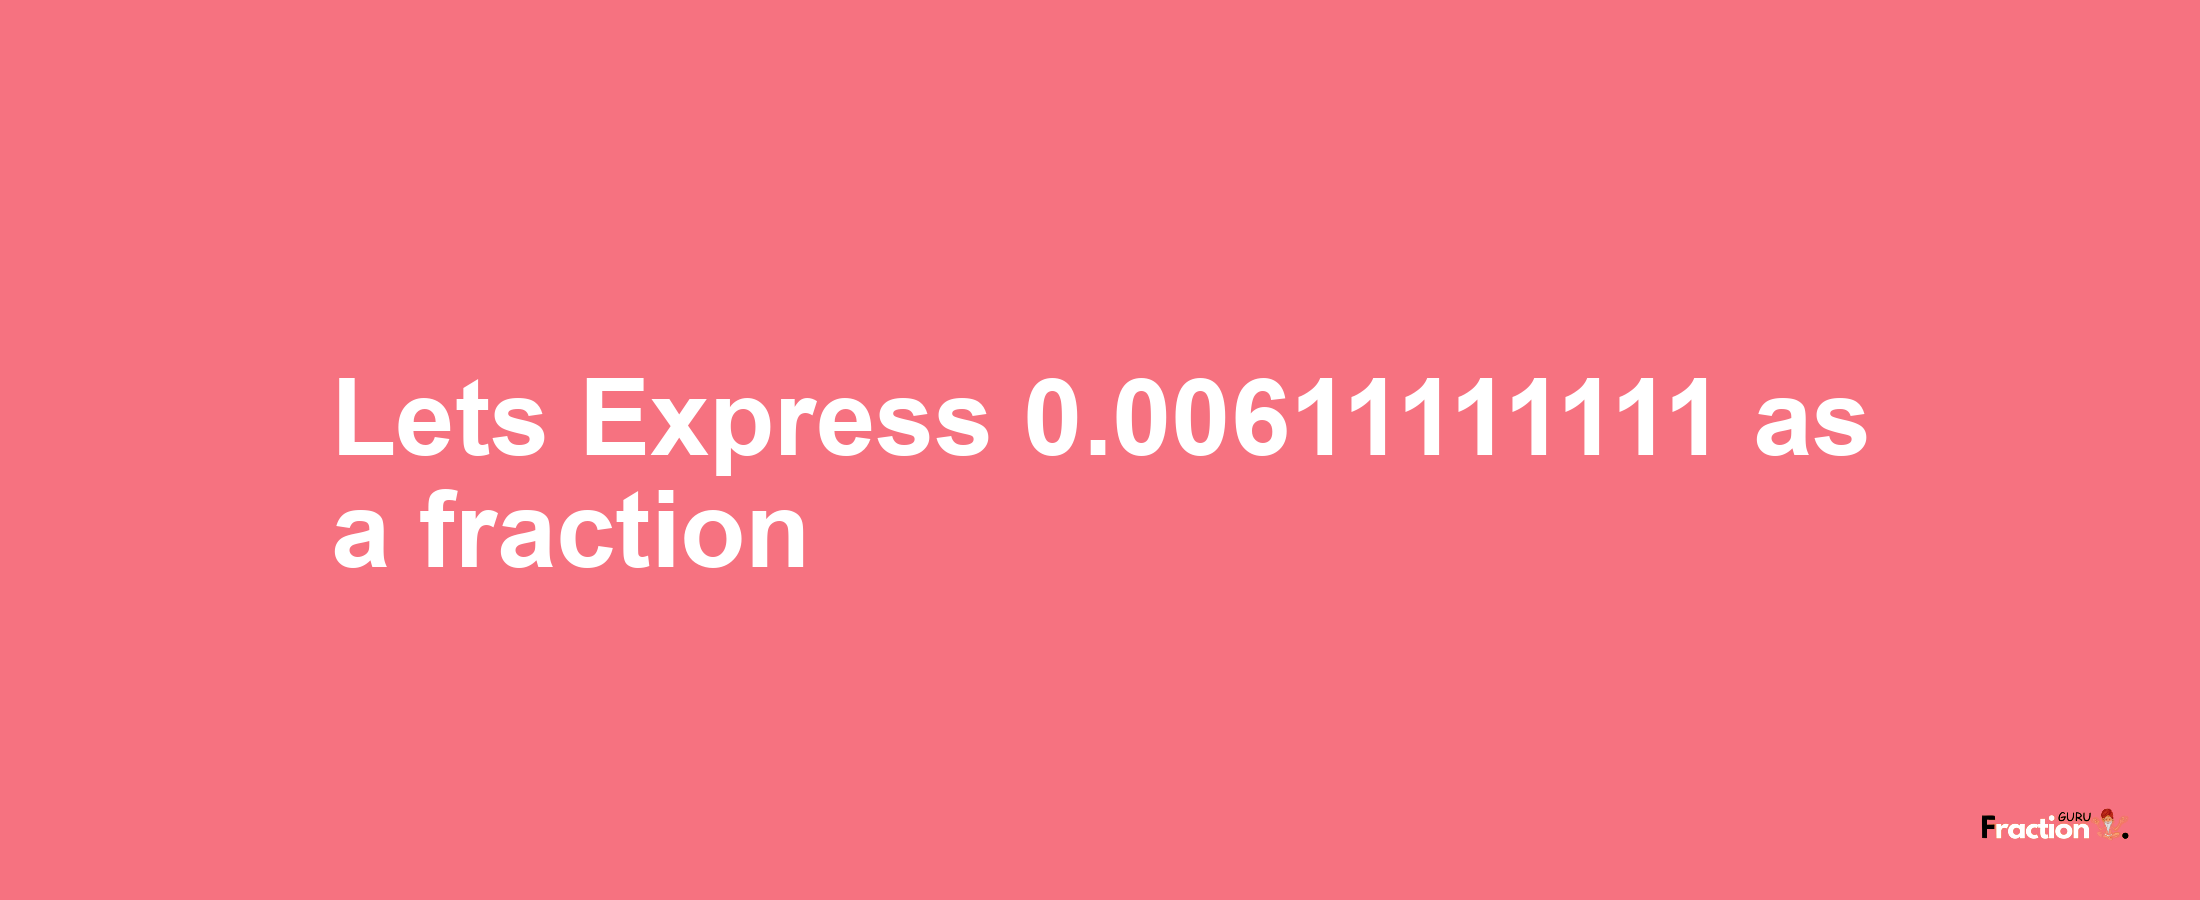 Lets Express 0.00611111111 as afraction